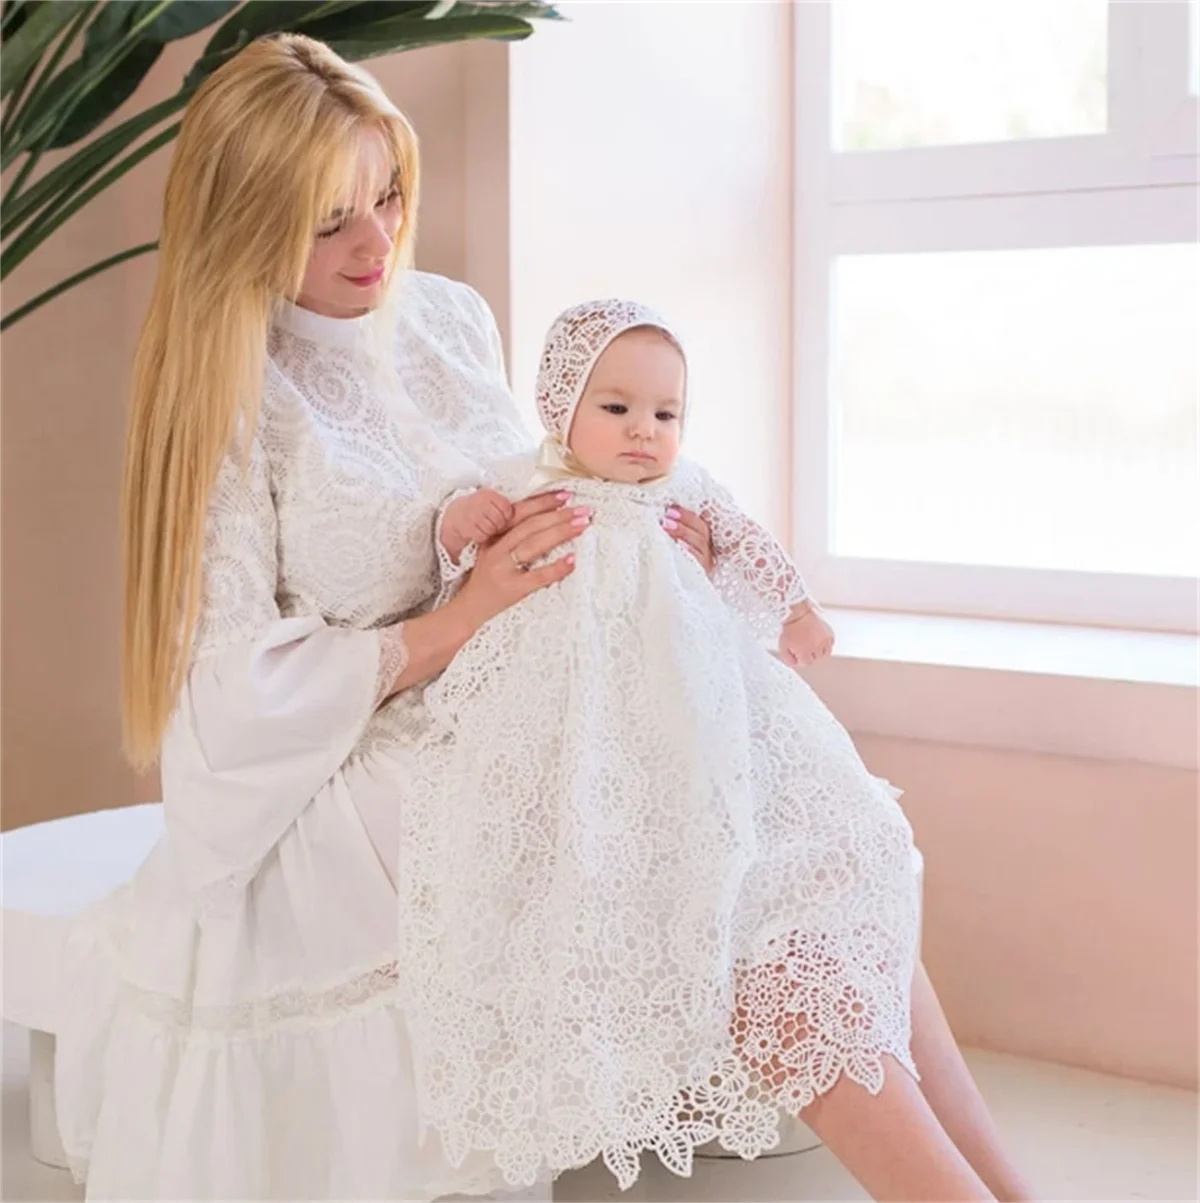 

White Baptism Dress for Baby Girl 2022 Flower Girls Dresses Lace Long Sleeve Outfit Christening Gowns Toddler Blessing Dress